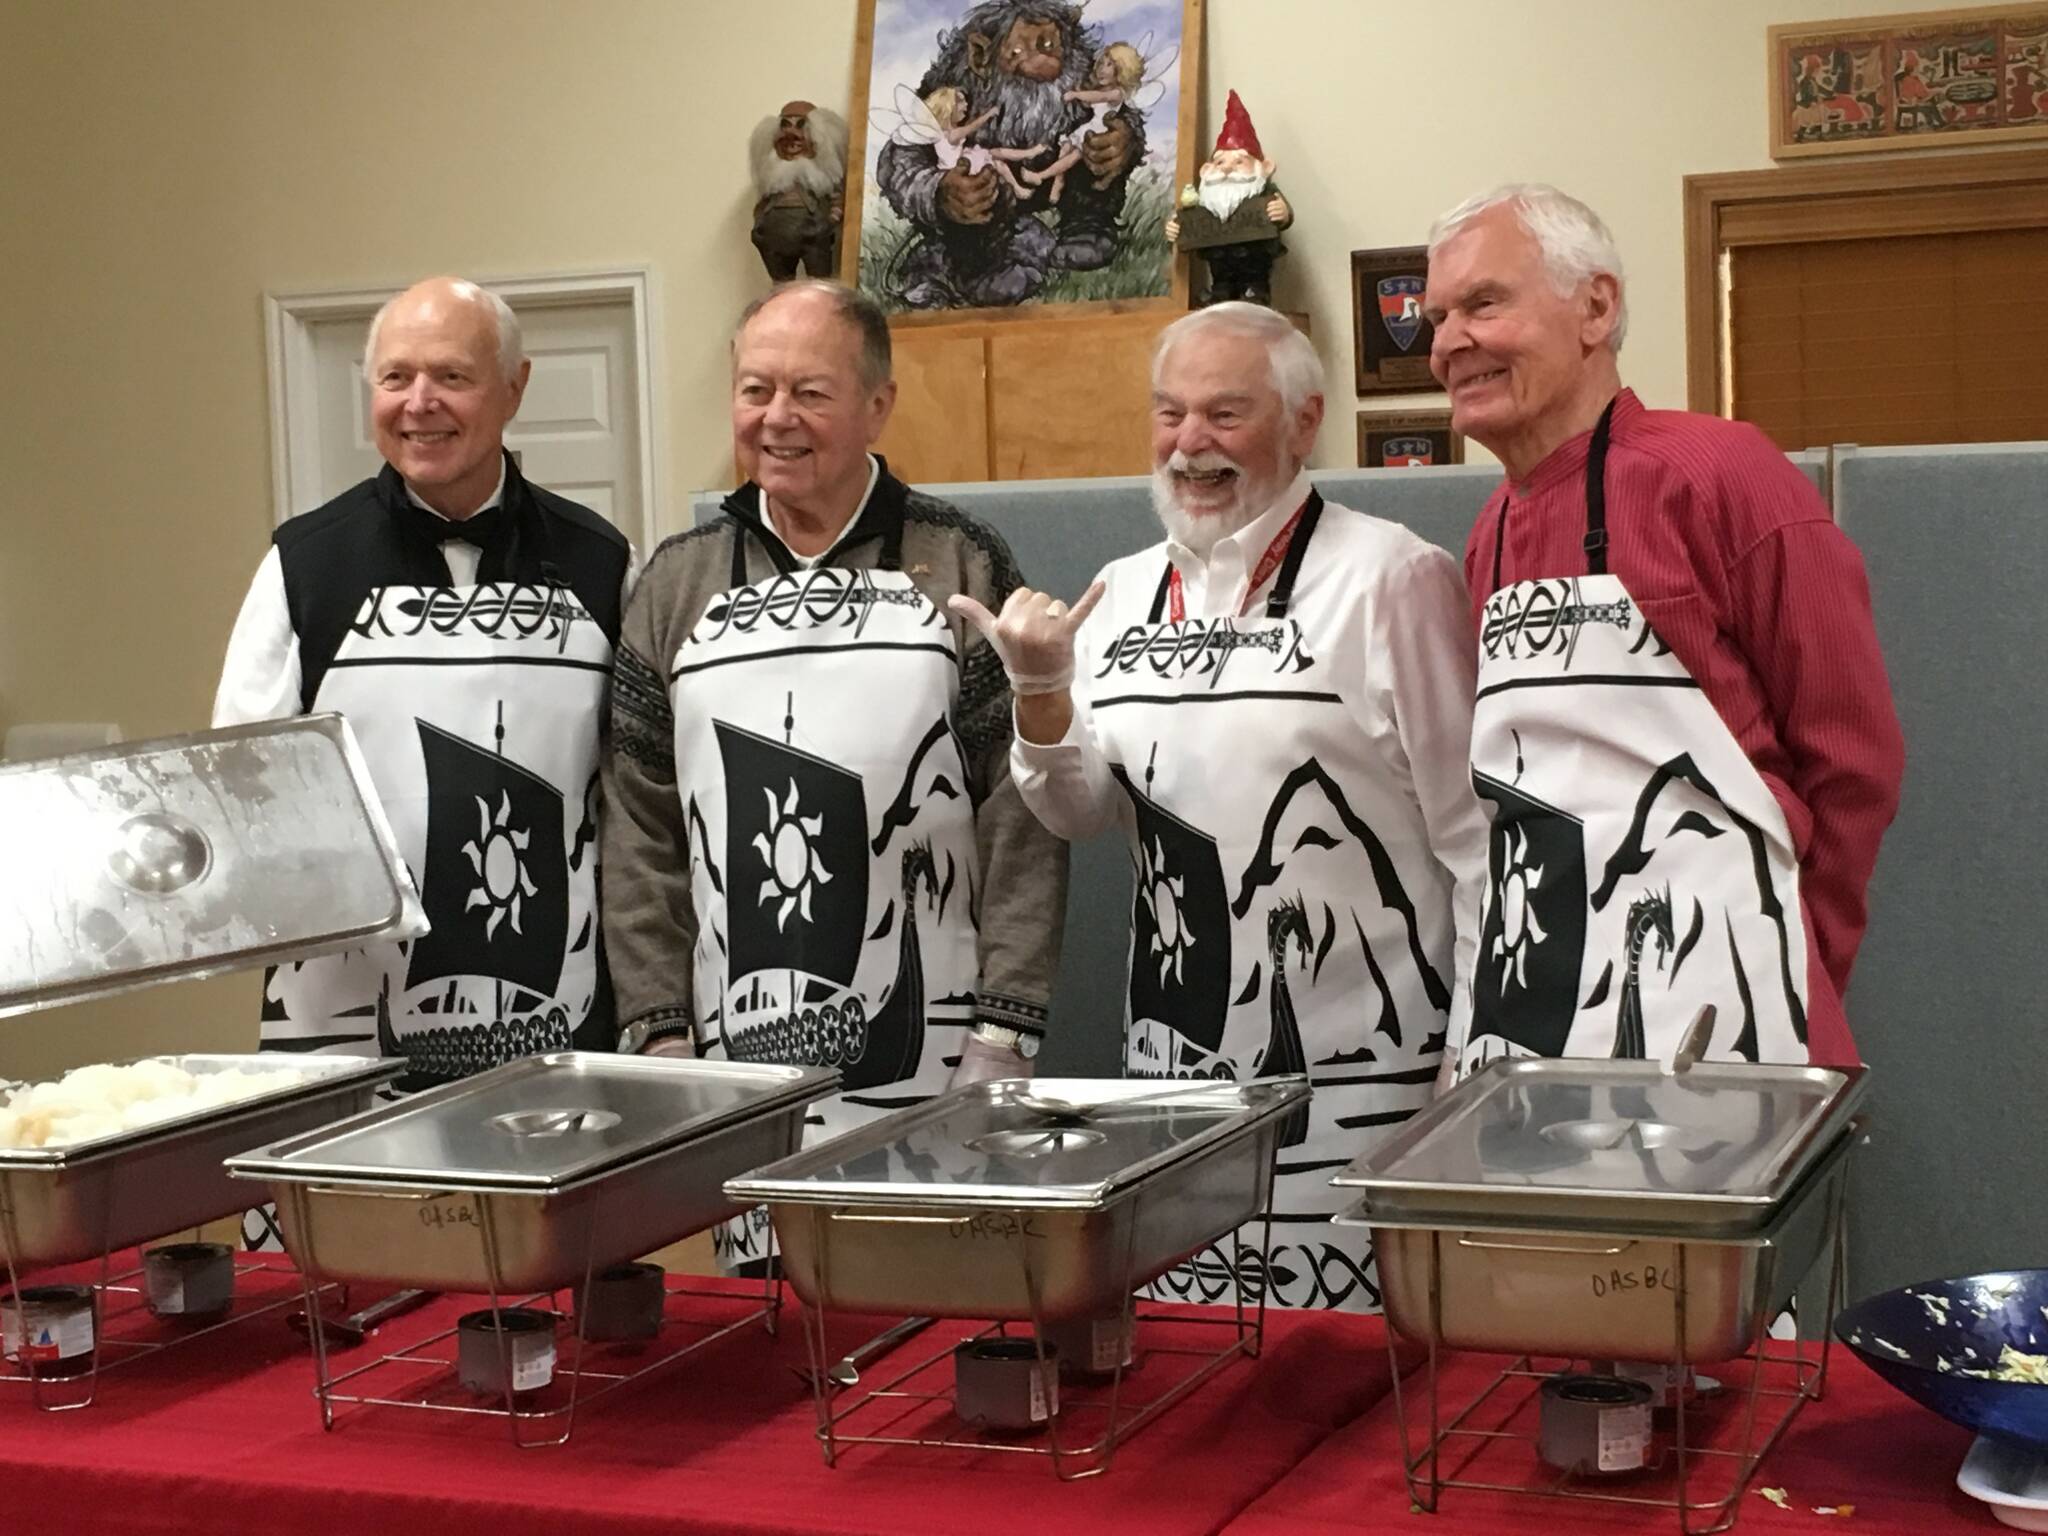 From left, Loran Haworth, Dick Johnson, Pete Berg and Bob Fordserve Lutefisk at the Whidbey Nordic Lodge’s 2019 dinner. (Photo provided)